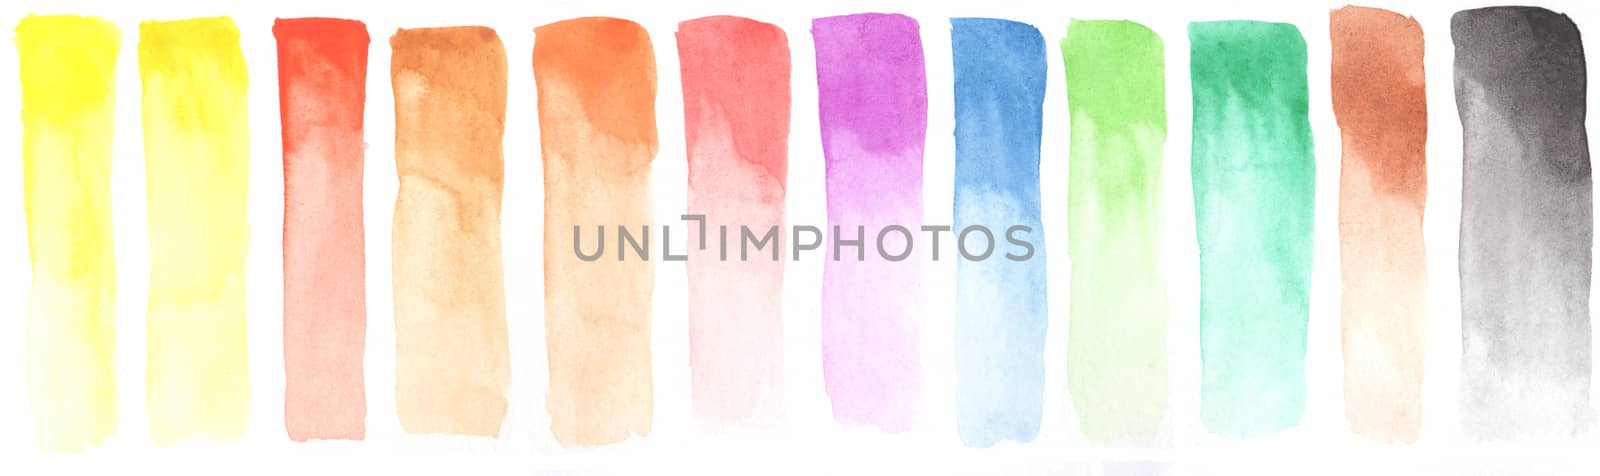 A Watercolor Color Chart on white background by galinasharapova